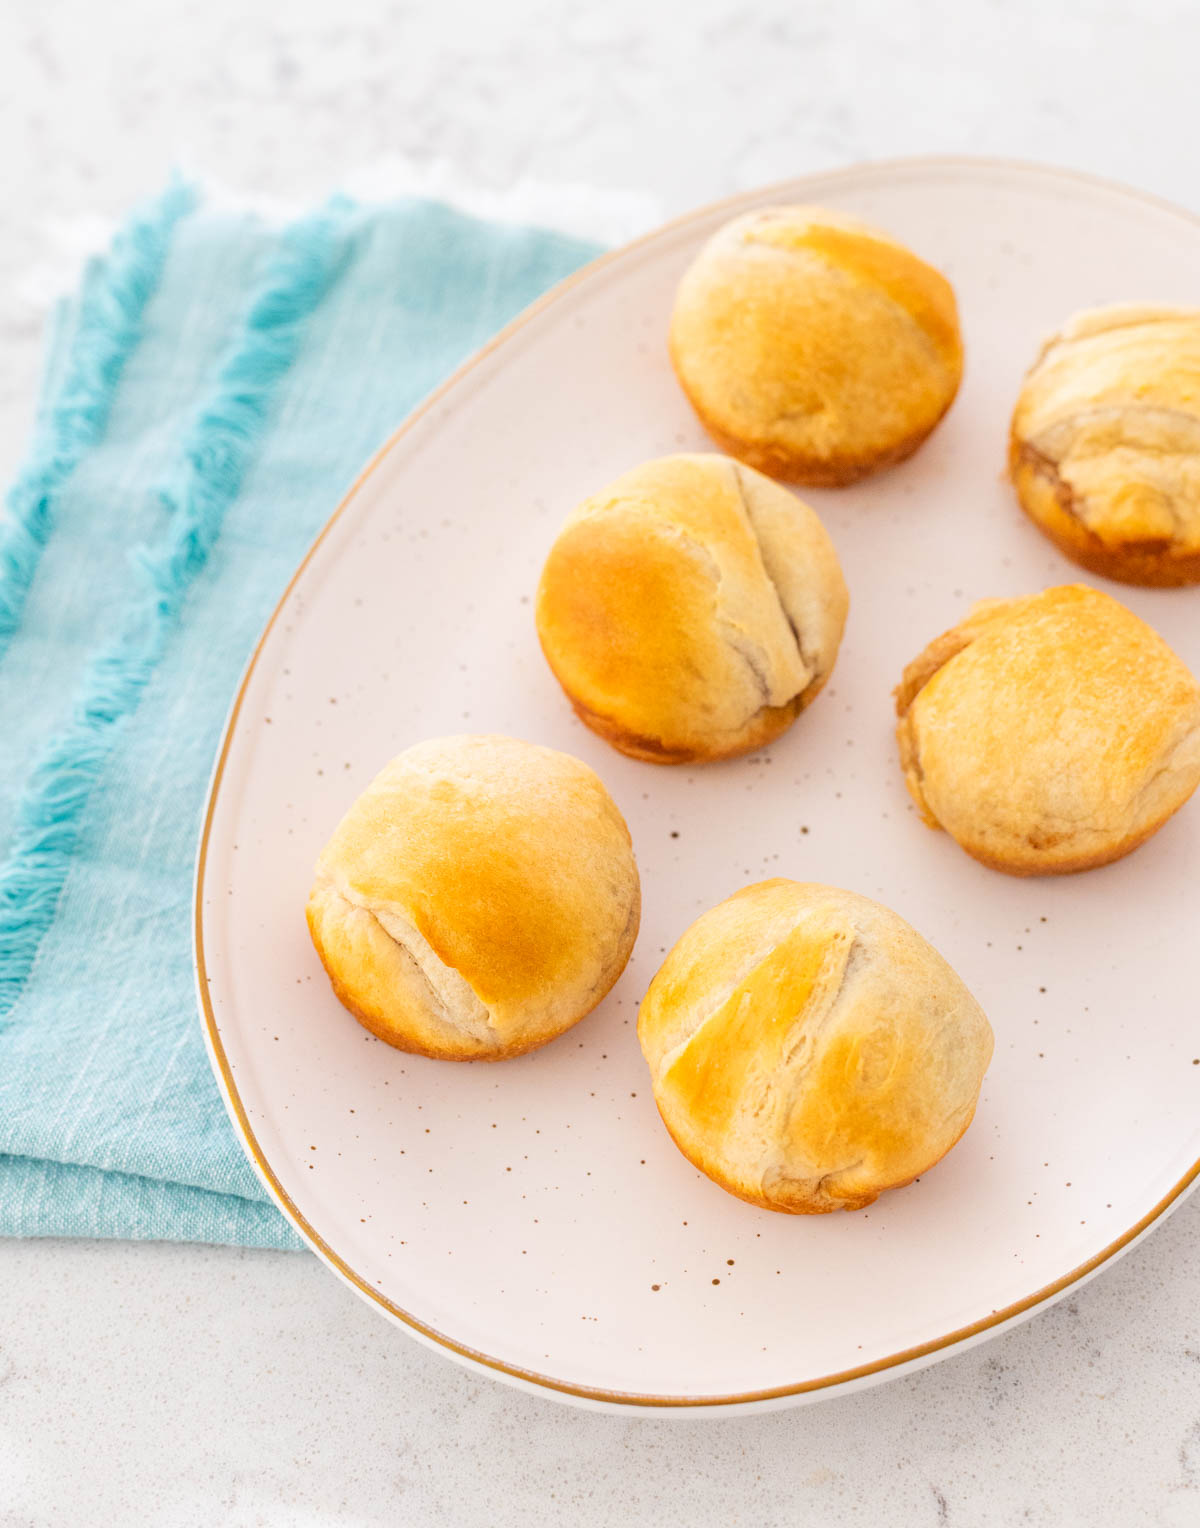 A platter of baked rolls is ready to be served.